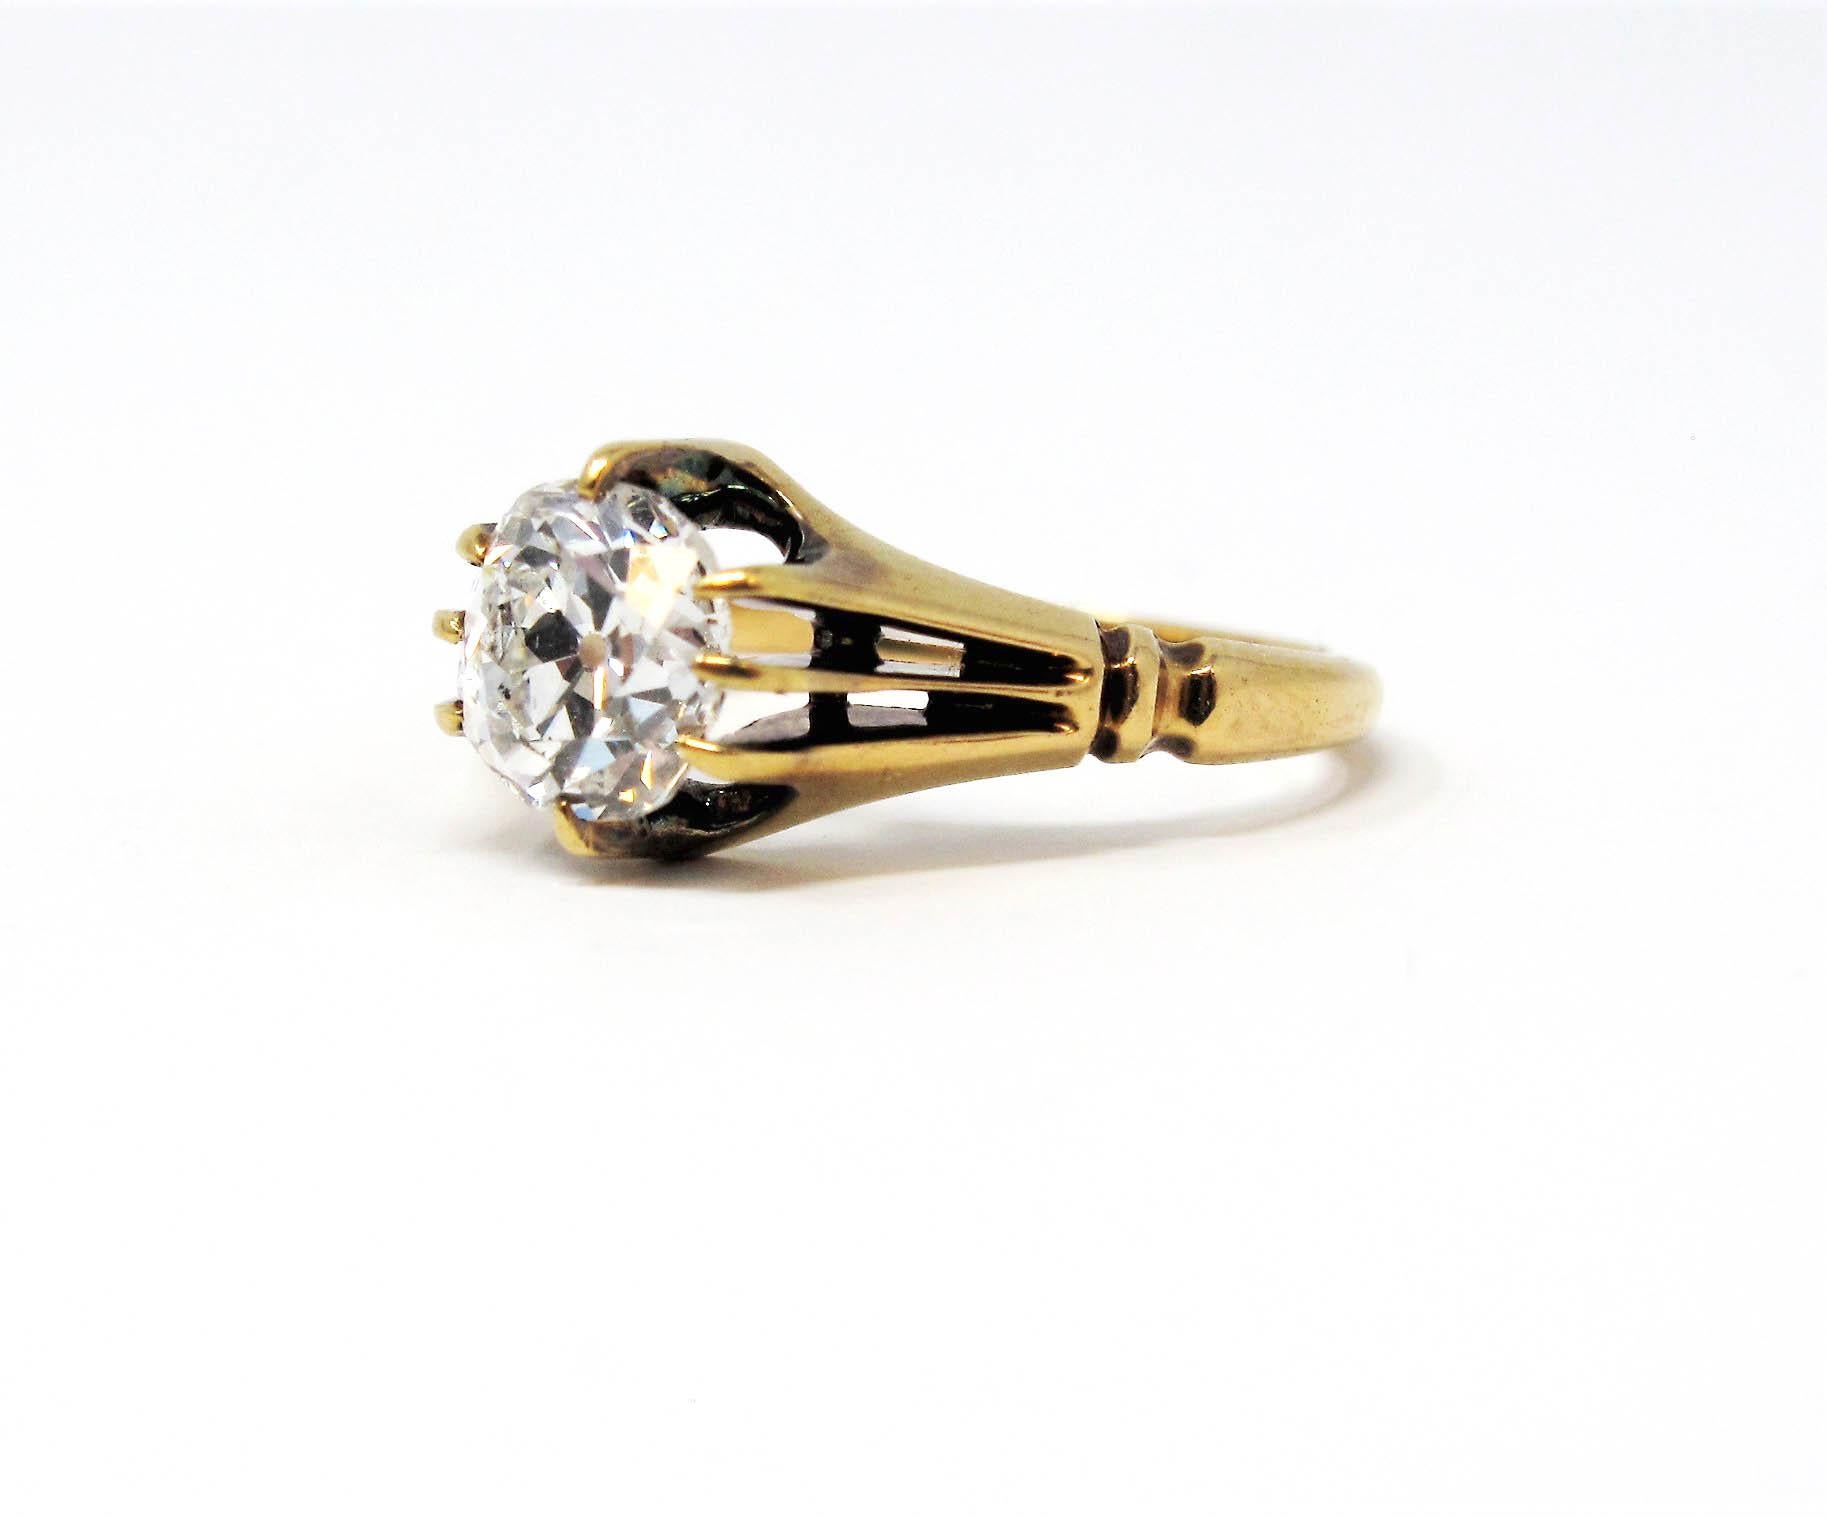 Antique 1.40 Carat Old Mine Cut Diamond Solitaire 18 Karat Yellow Gold Ring For Sale 1